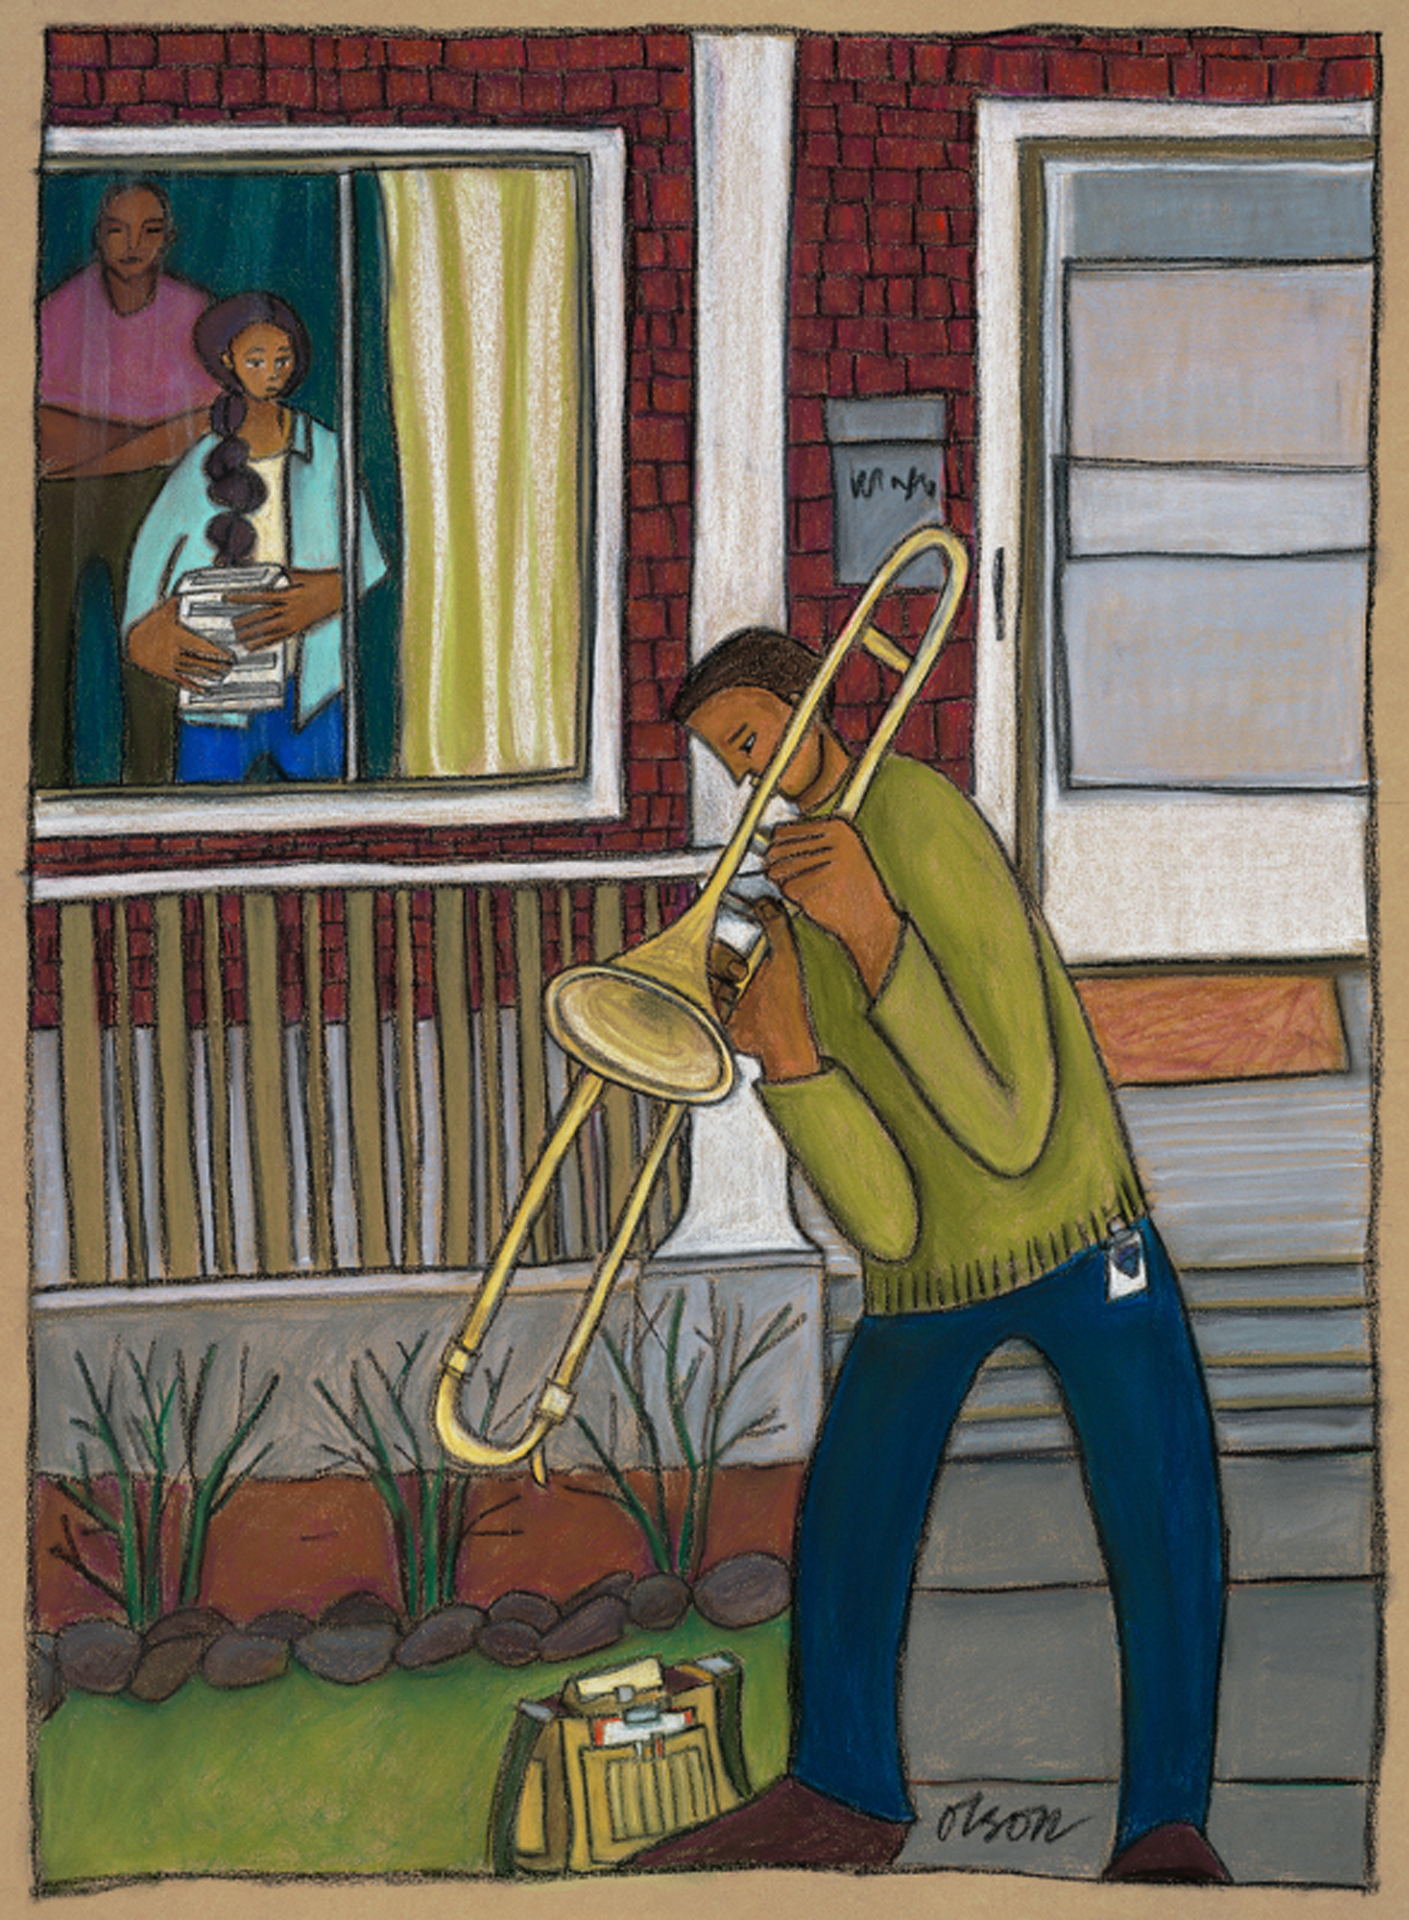 painting of a person playig the trombone outside of their house while people watch from a window